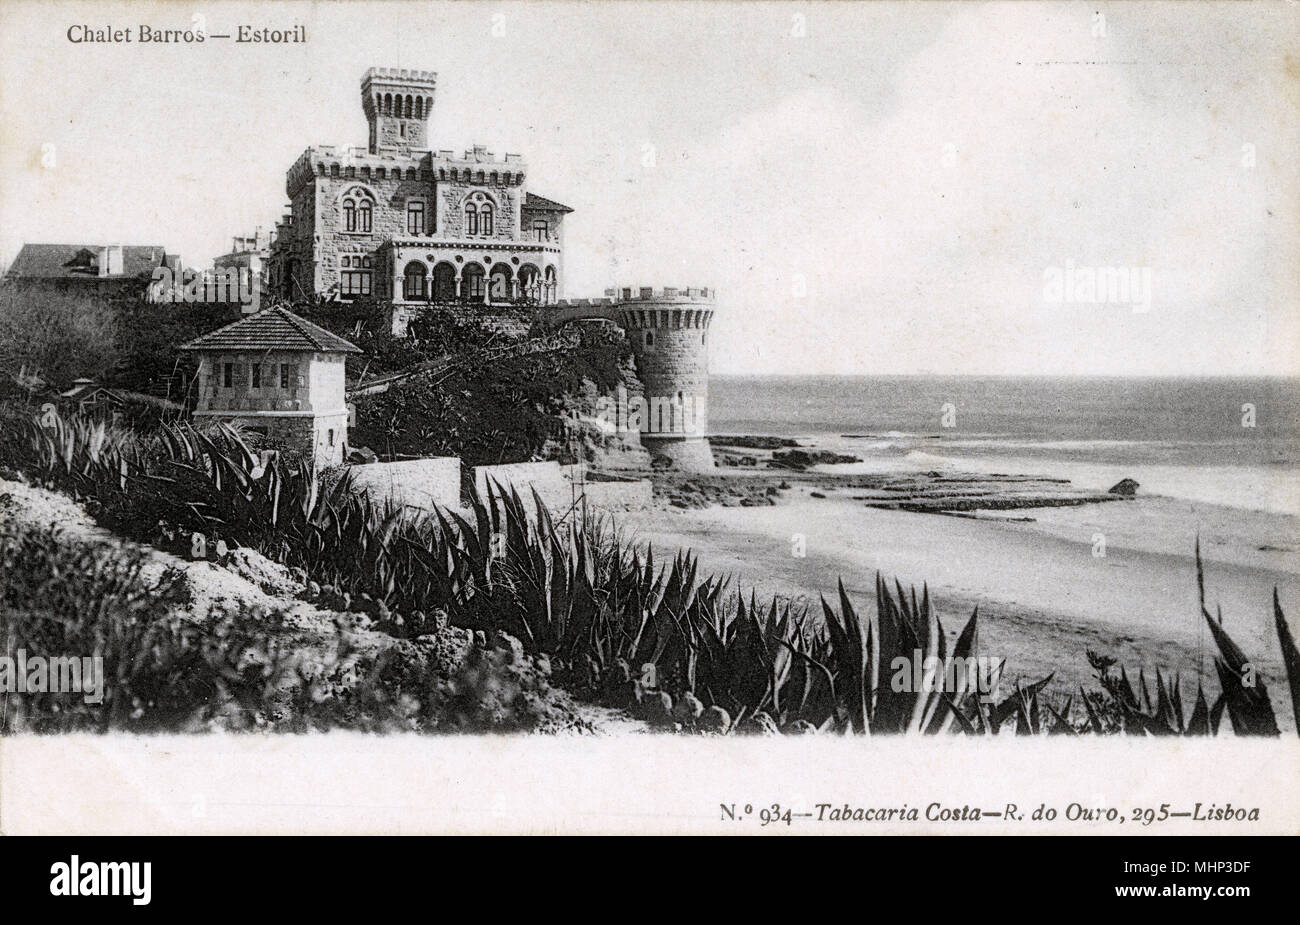 Chalet Barros, Estoril, Cascais, Portugal, built in the late 19th century in the style of a medieval castle.      Date: circa 1905 Stock Photo